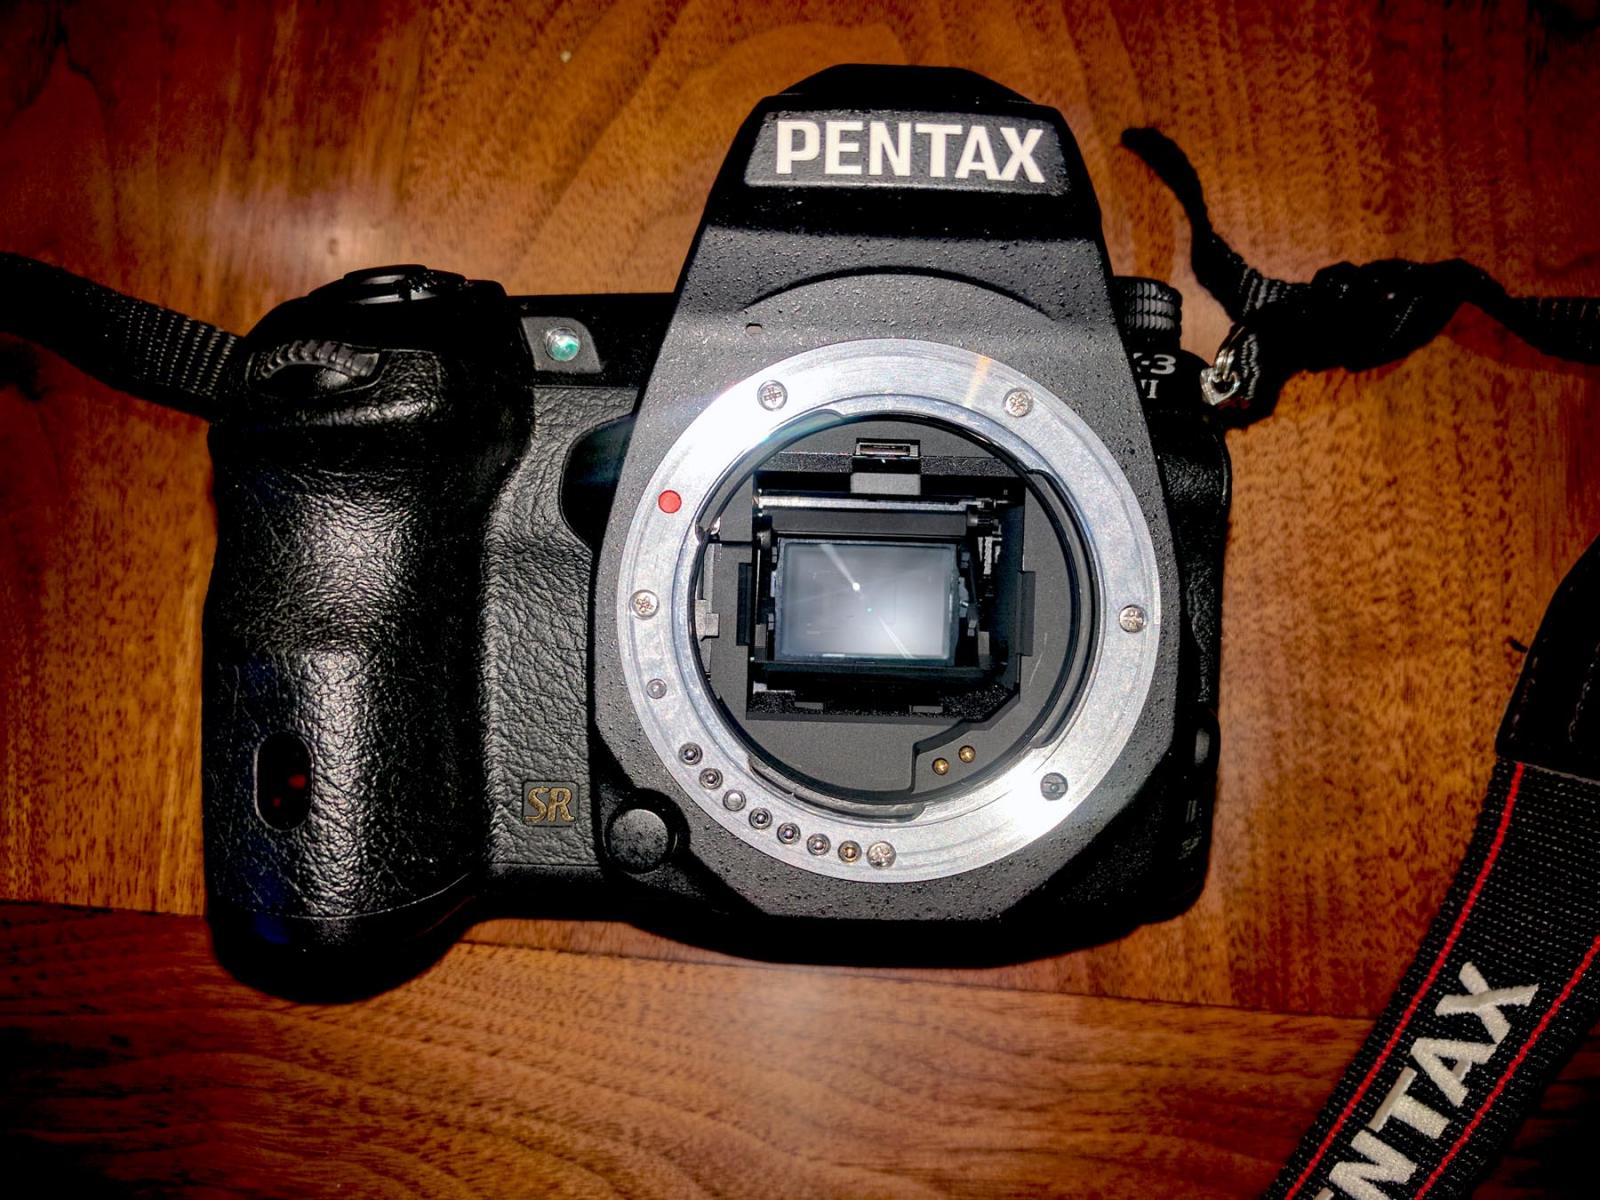 For sale Pentax K3ii w/ 50mm 1.8 lens, SD Cards, Portable Studio, And Reflector Set